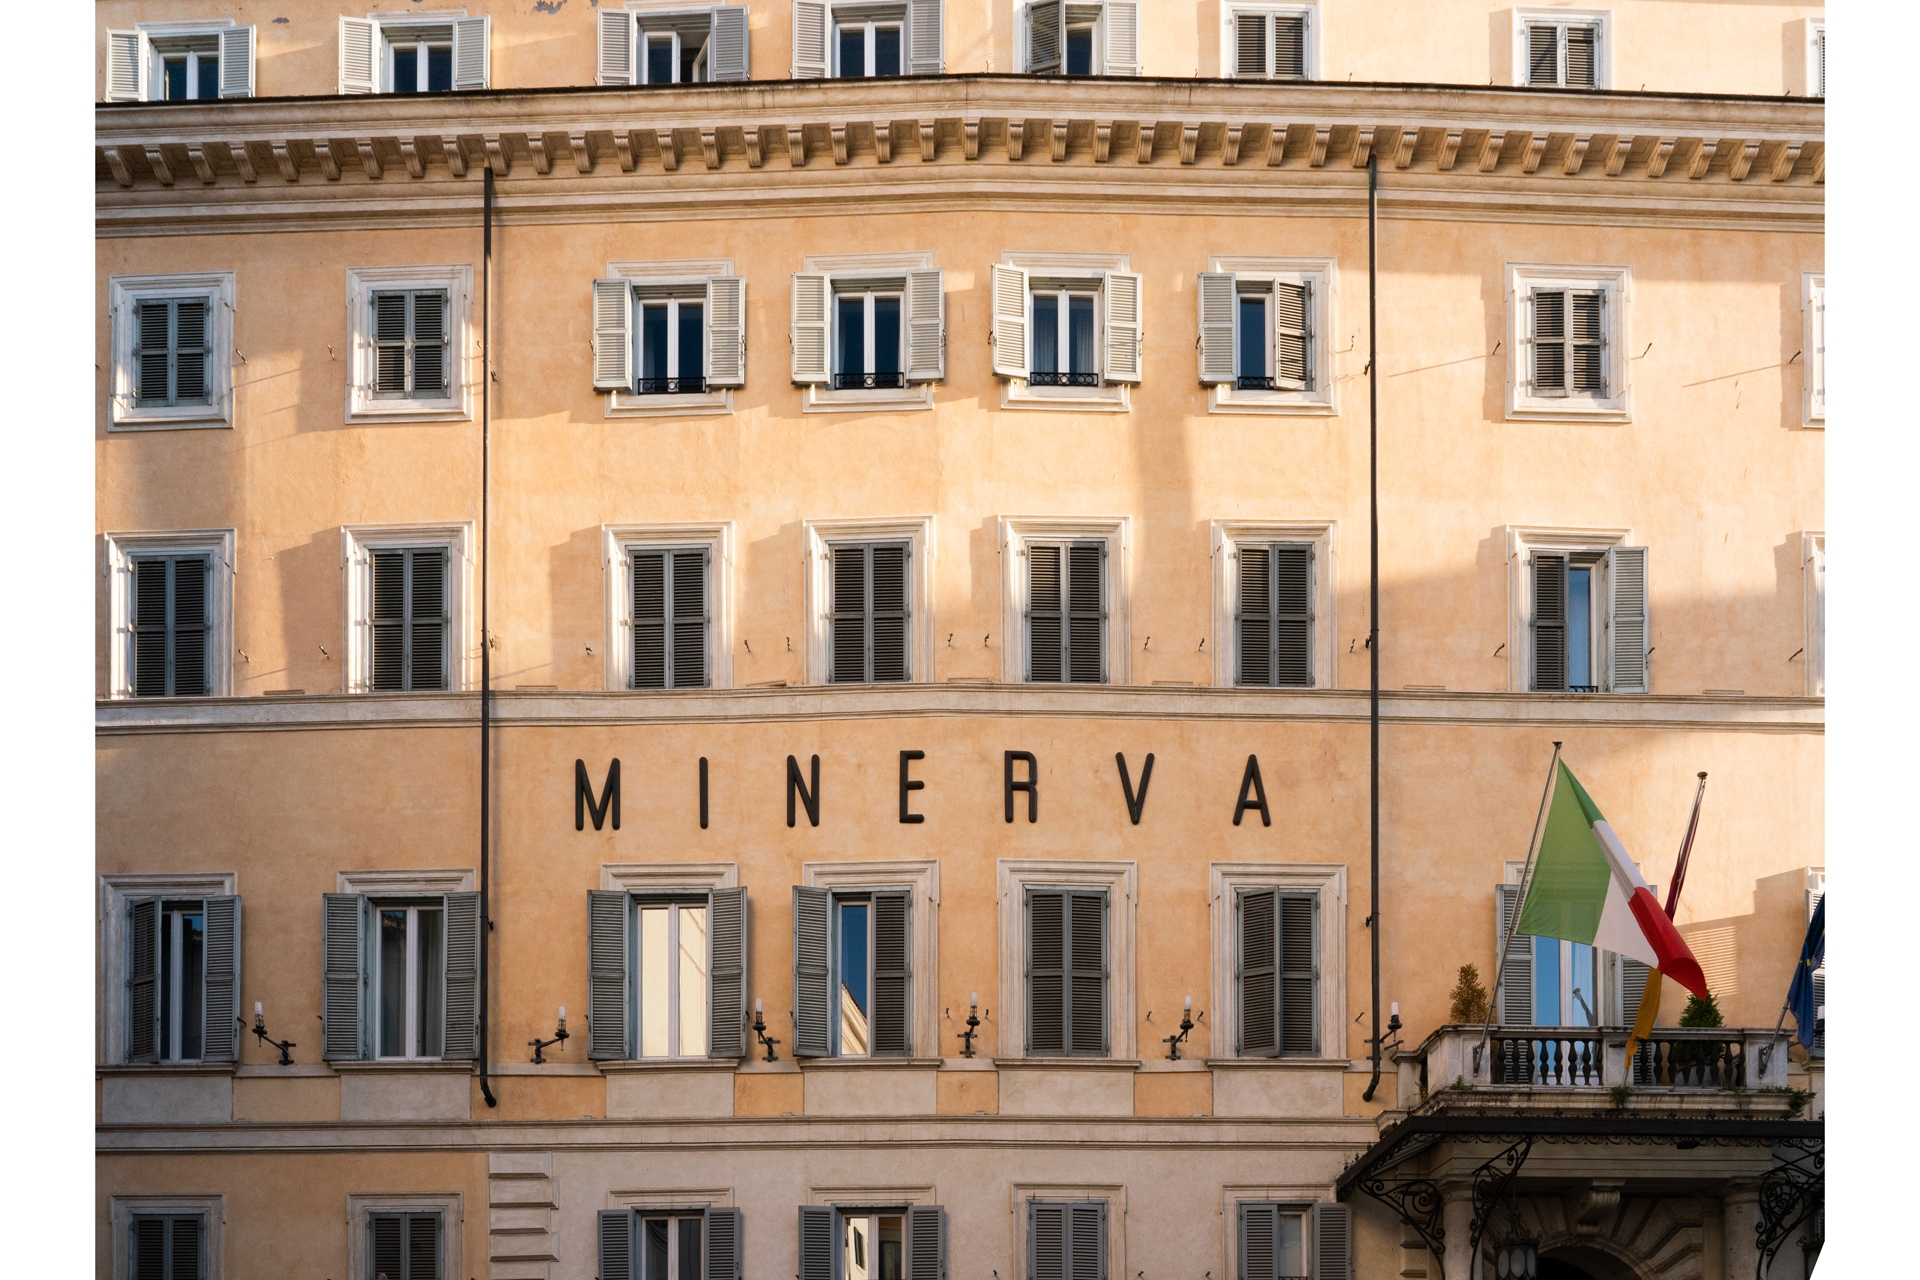 The facade of the Minerva today